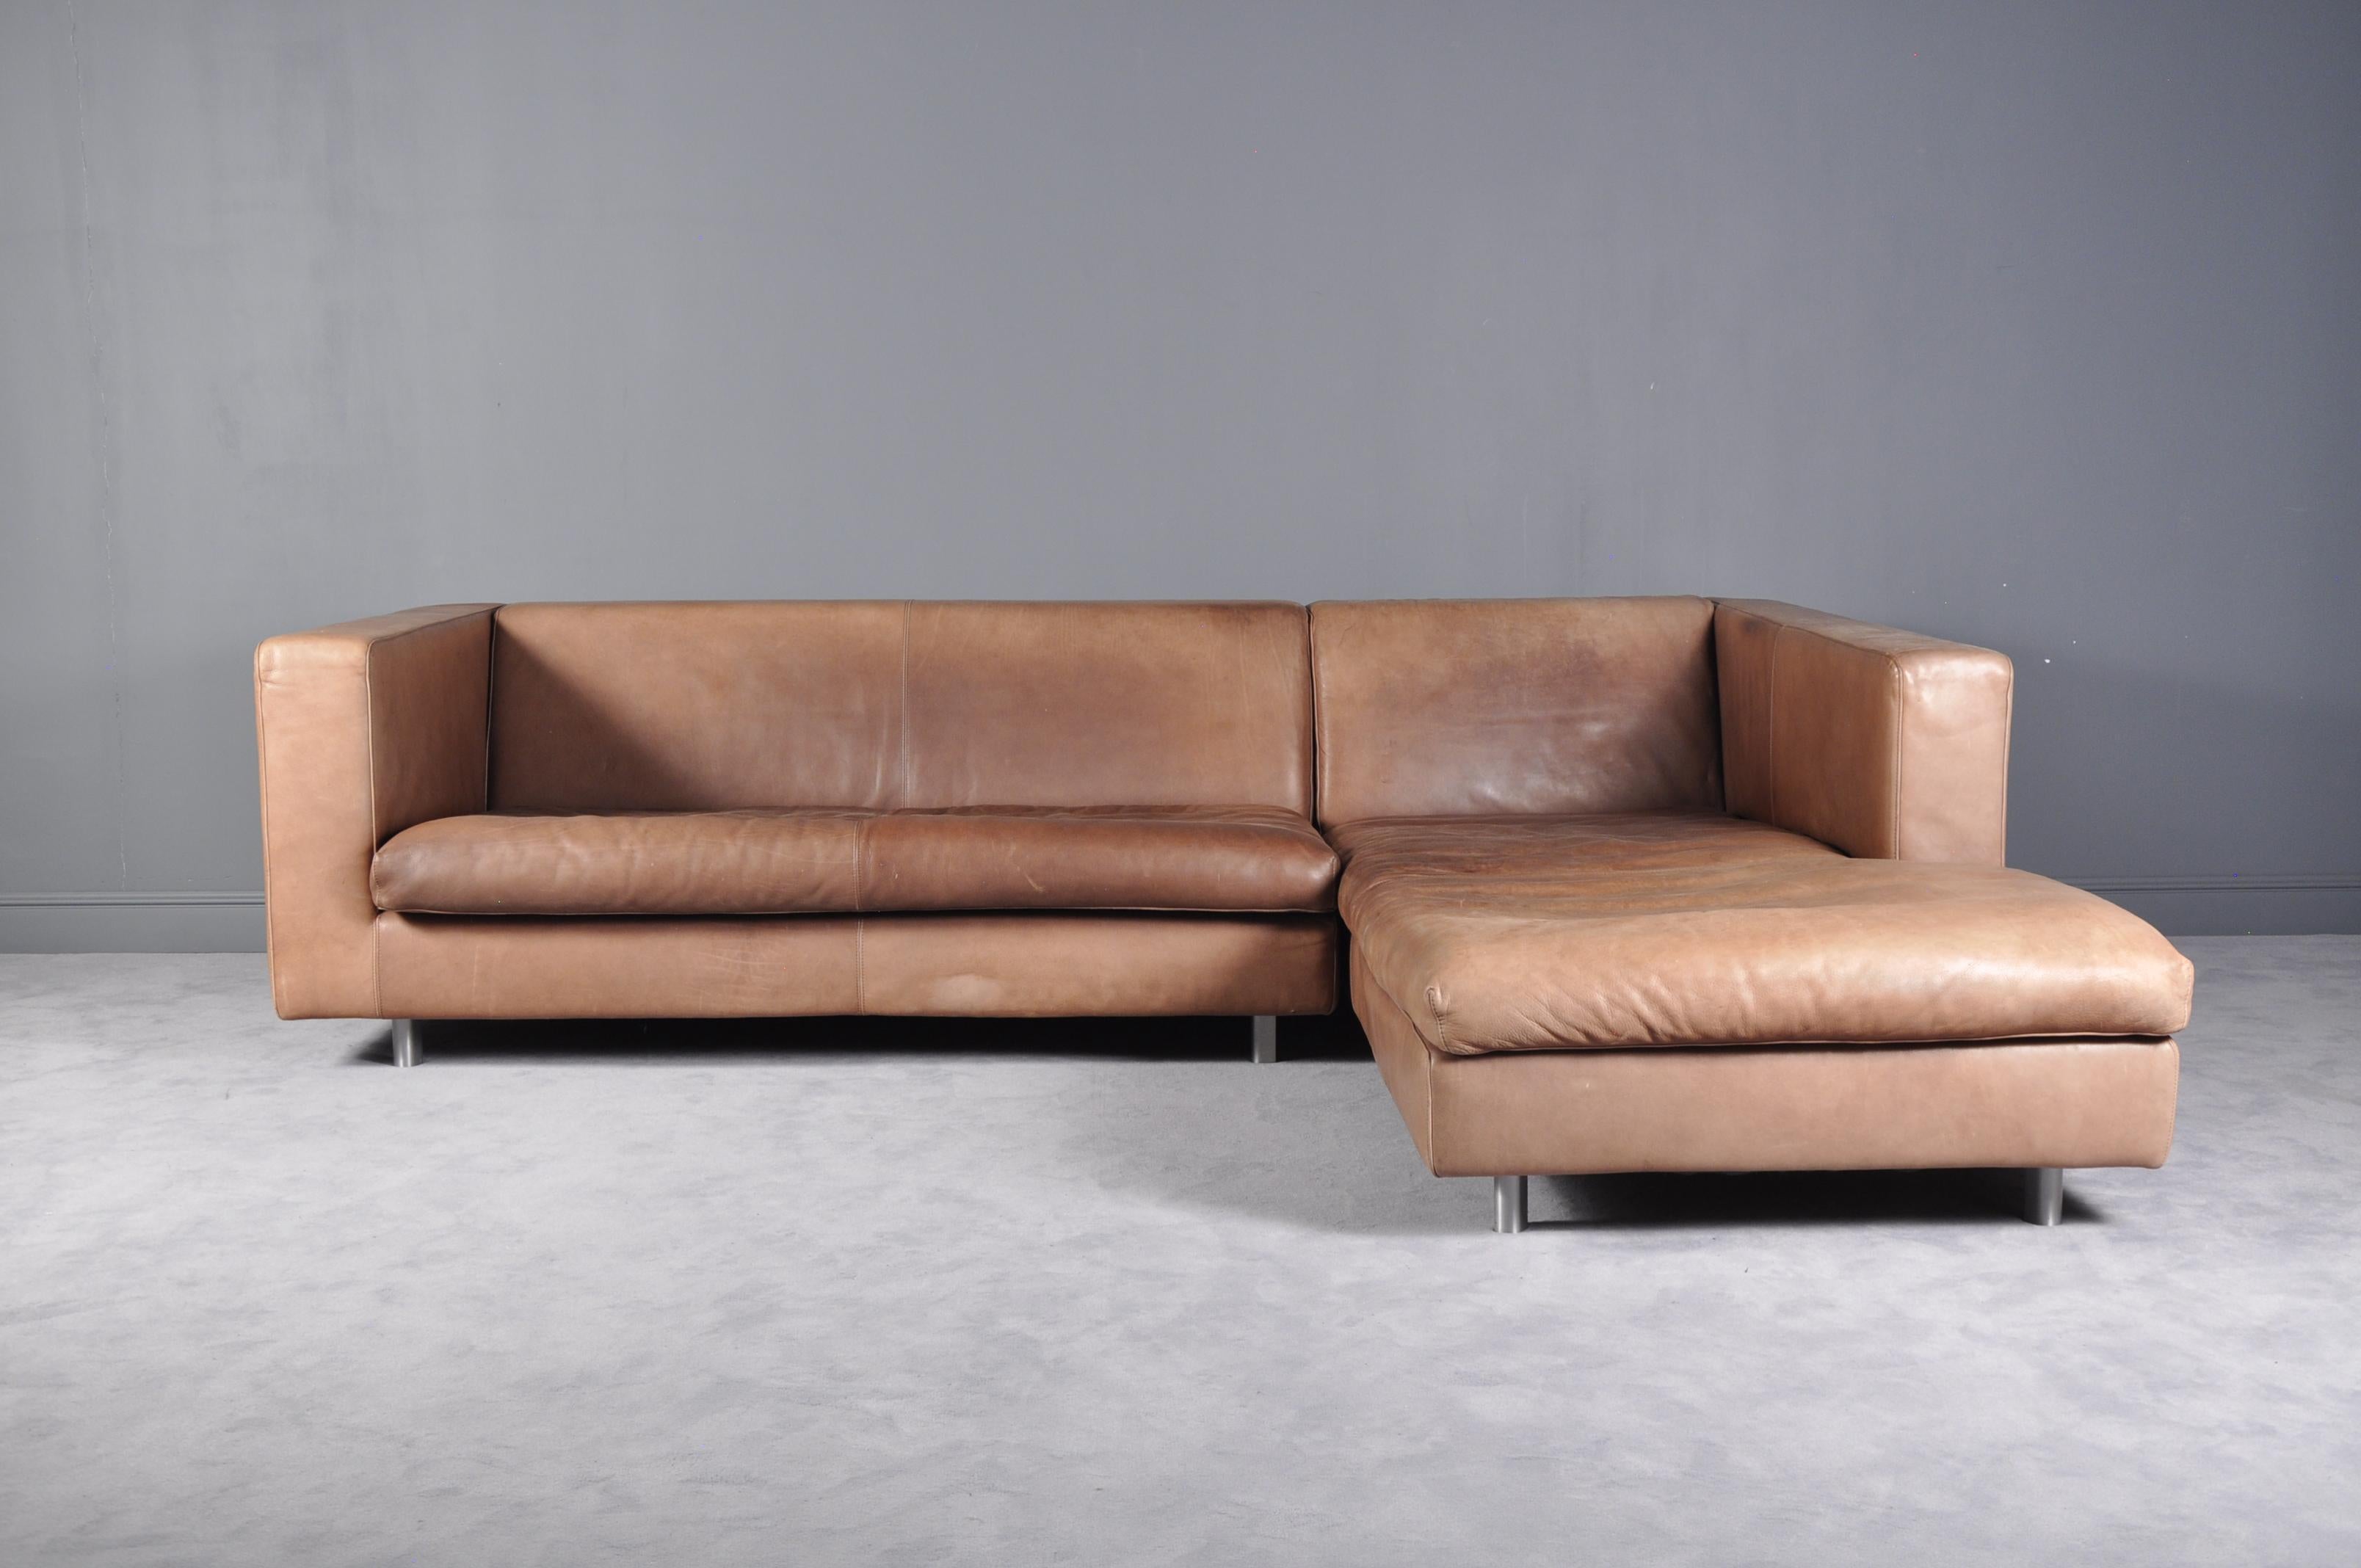 Measures: W 260 / D 100/200 / H 70 cm

Seat height 40 cm

Beautiful, sumptuous Italian leather corner sofa with generously proportioned seating. This high quality leather, will age superbly with the passing of time.